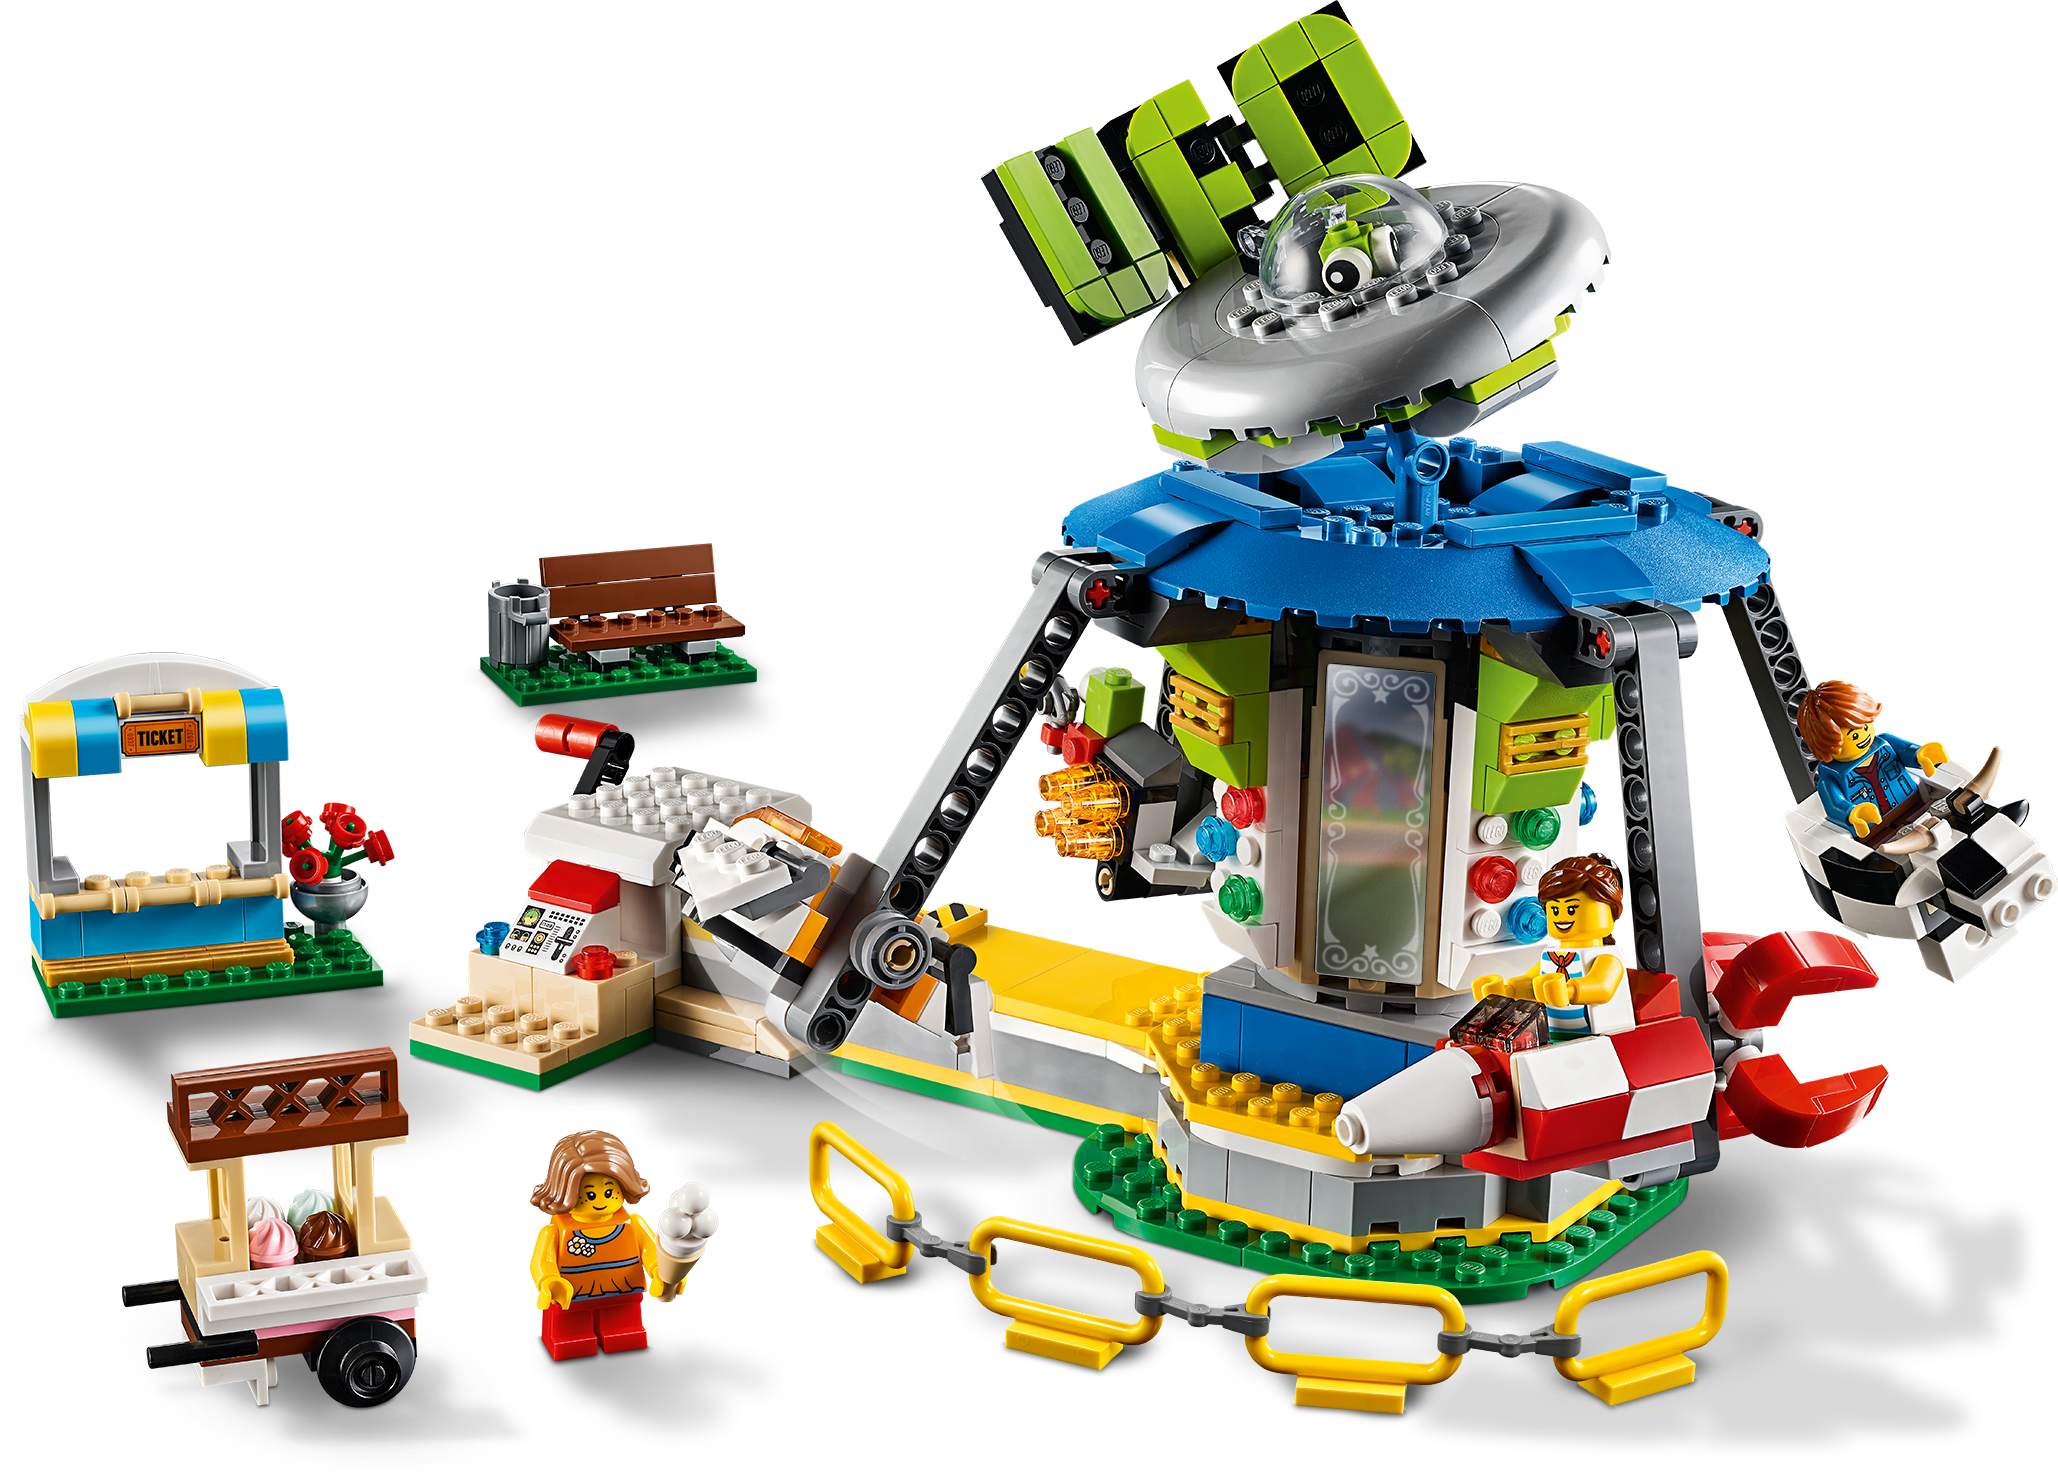 LEGO Creator Fairground Carousel 31095 Space-Themed Building Kit (595 Pieces) - image 7 of 8